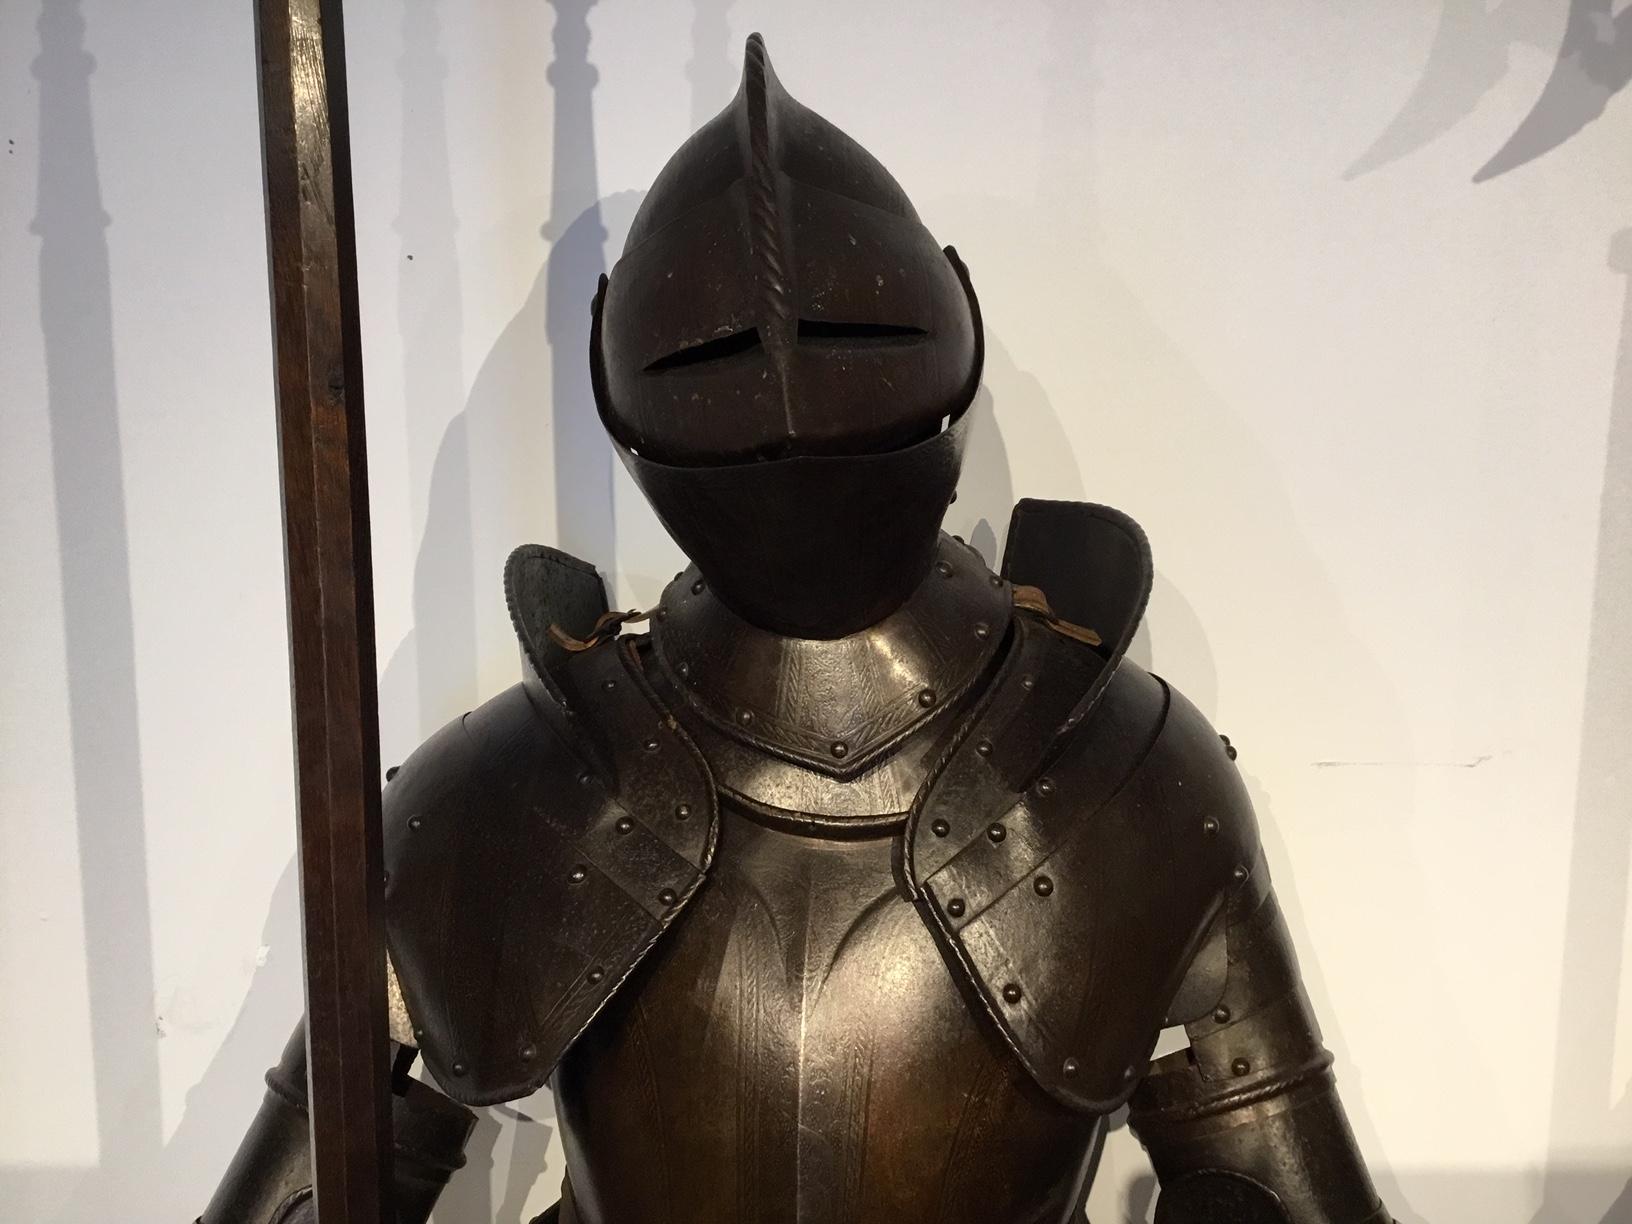 A magnificent pair of 19th century suit of armour in the 16th century style. The well patinated steel finely engraved and showing signs of original gilding. Standing life size complete with leather strapping and chain mail detail, standing upon the